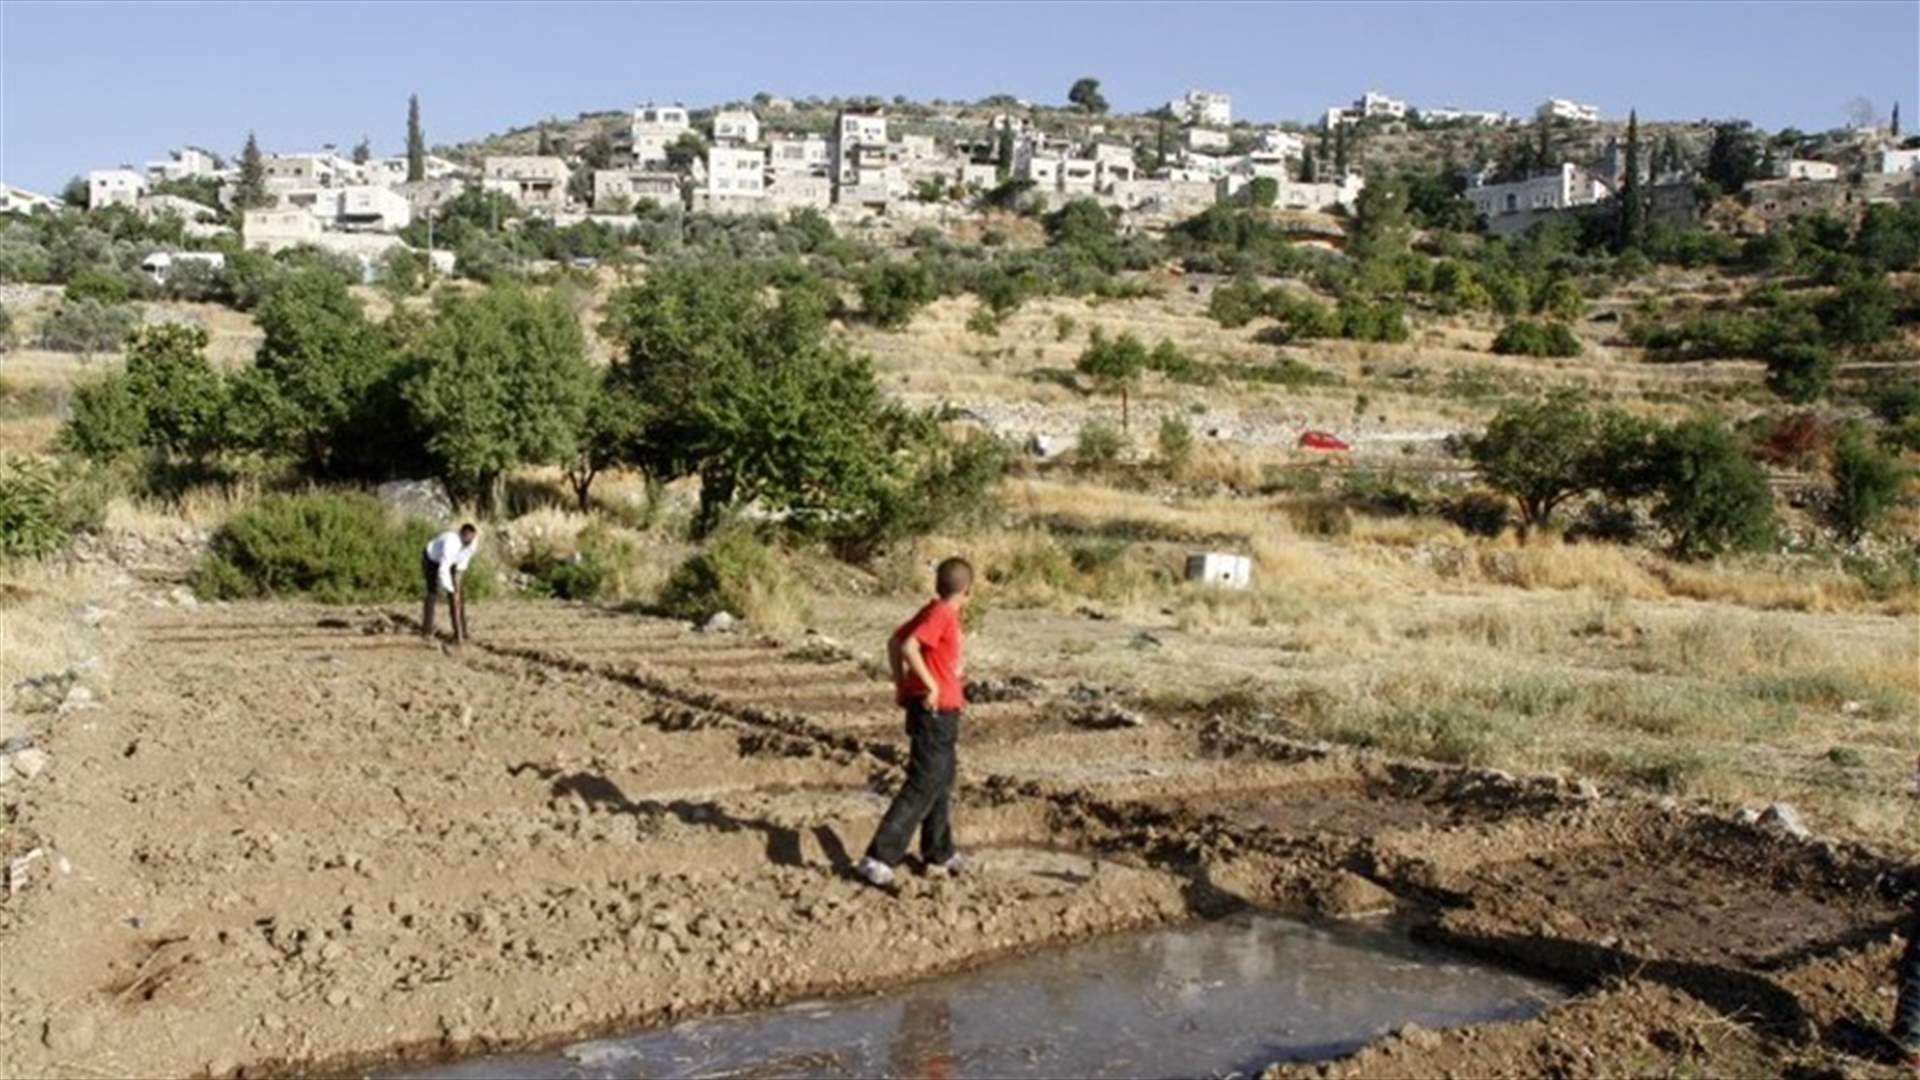 EU calls on Israel to stop plans for new West Bank settlements